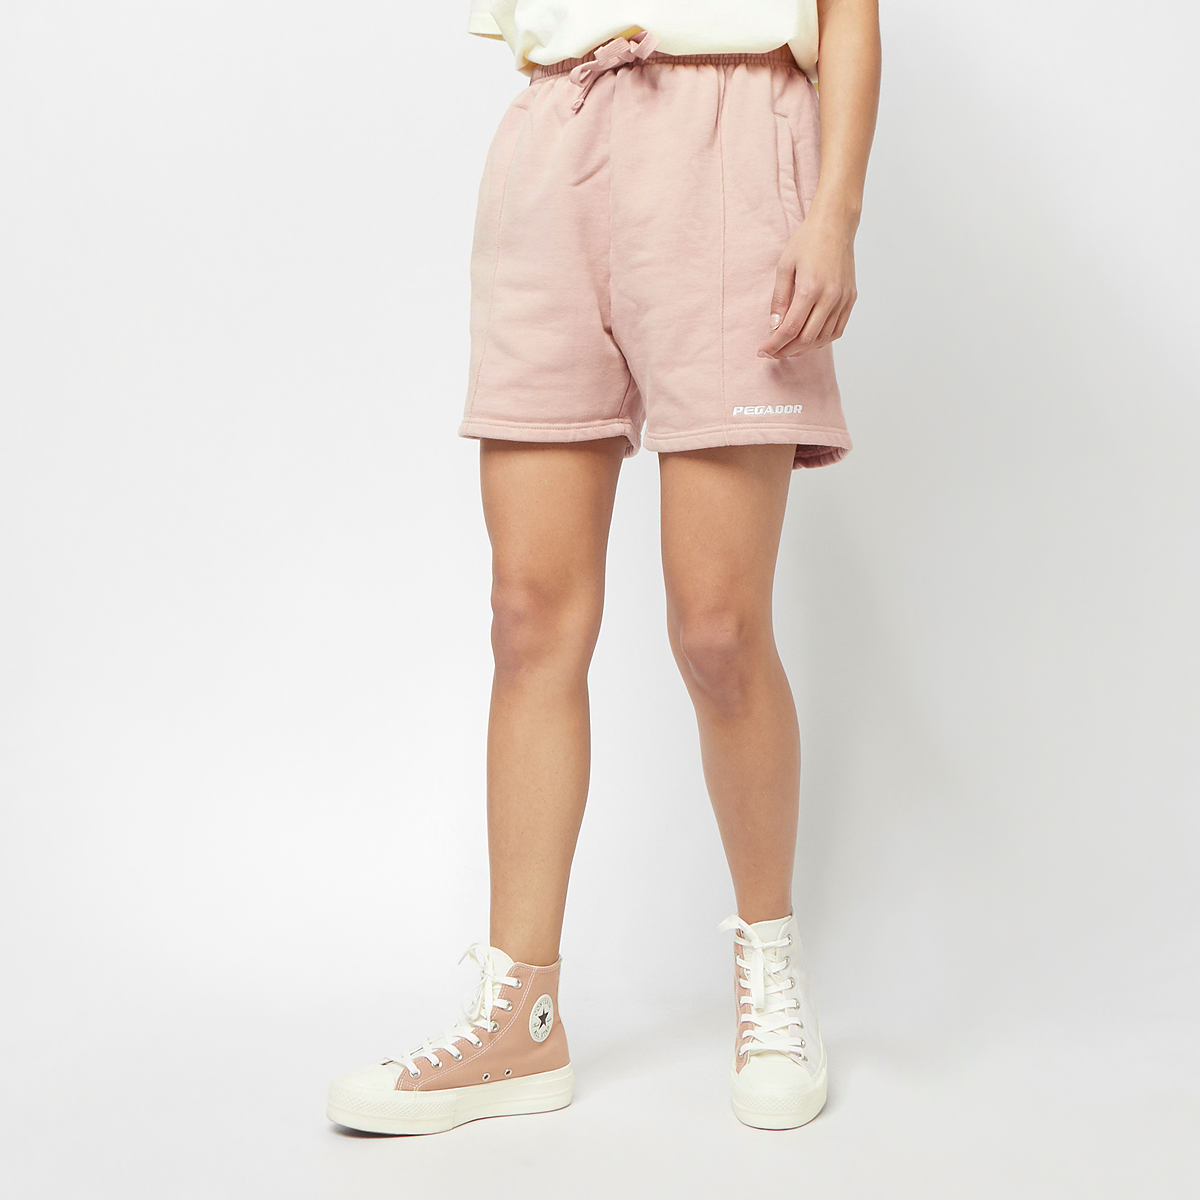 Productafbeelding: Sully High Waisted Short